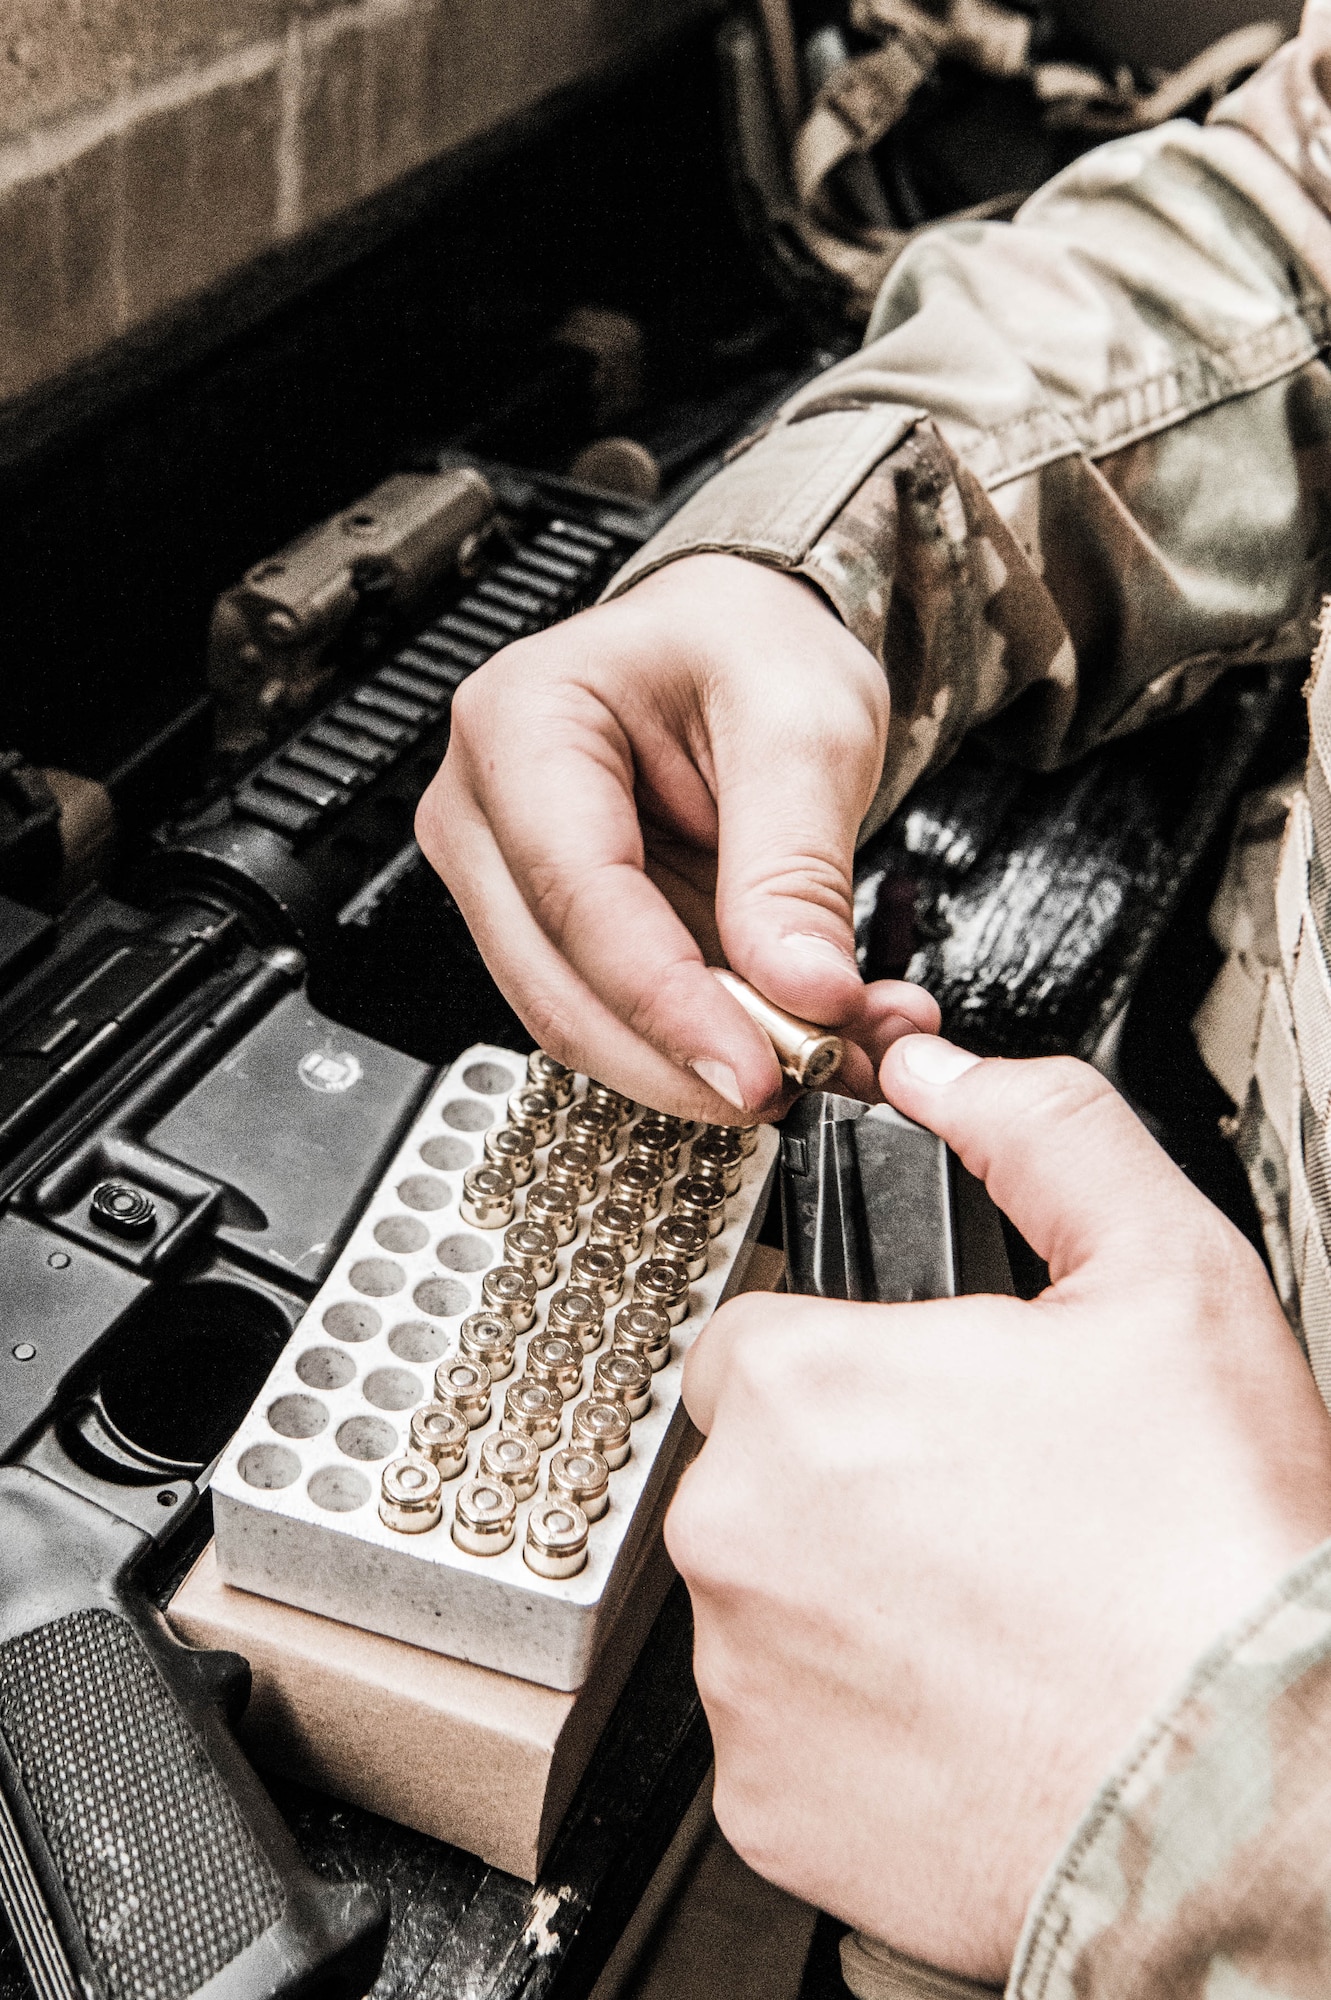 Senior Airman Troy Cramer, 436th Security Forces Squadron member, loads rounds of 9mm ammunition into a magazine before combat arms qualification Dec. 17, 2021, at Dover Air Force Base, Delaware. Each person receiving training is allotted an exact number of rounds to use during qualification. (U.S. Air Force photo by Mauricio Campino)